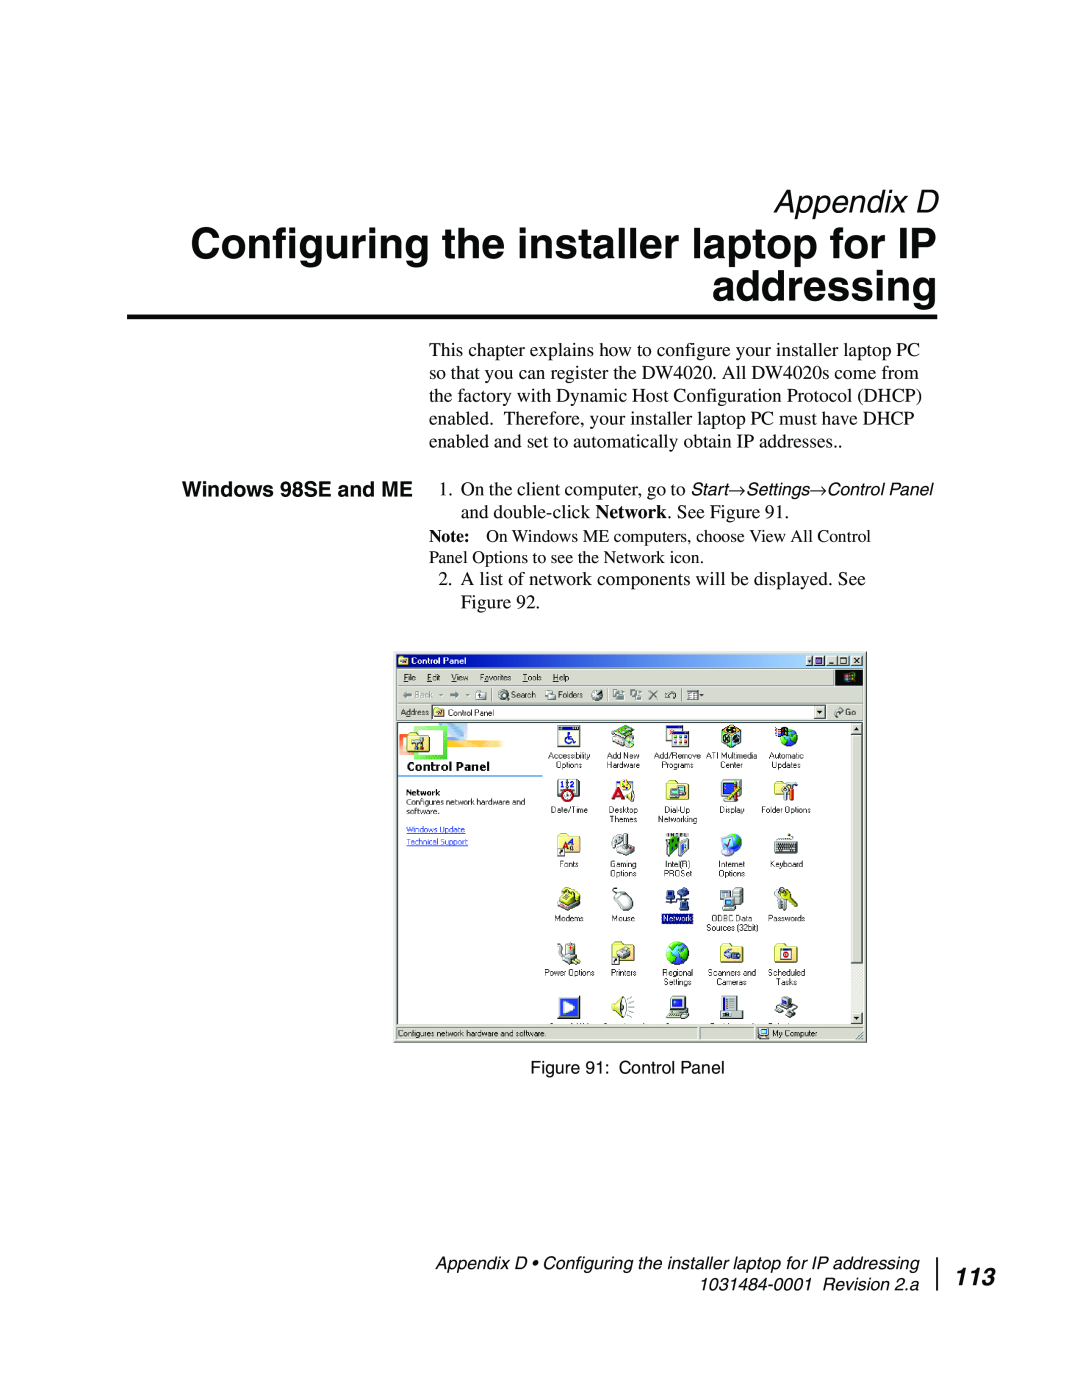 Hughes DW4020 manual Configuring the installer laptop for IP addressing, Appendix D 